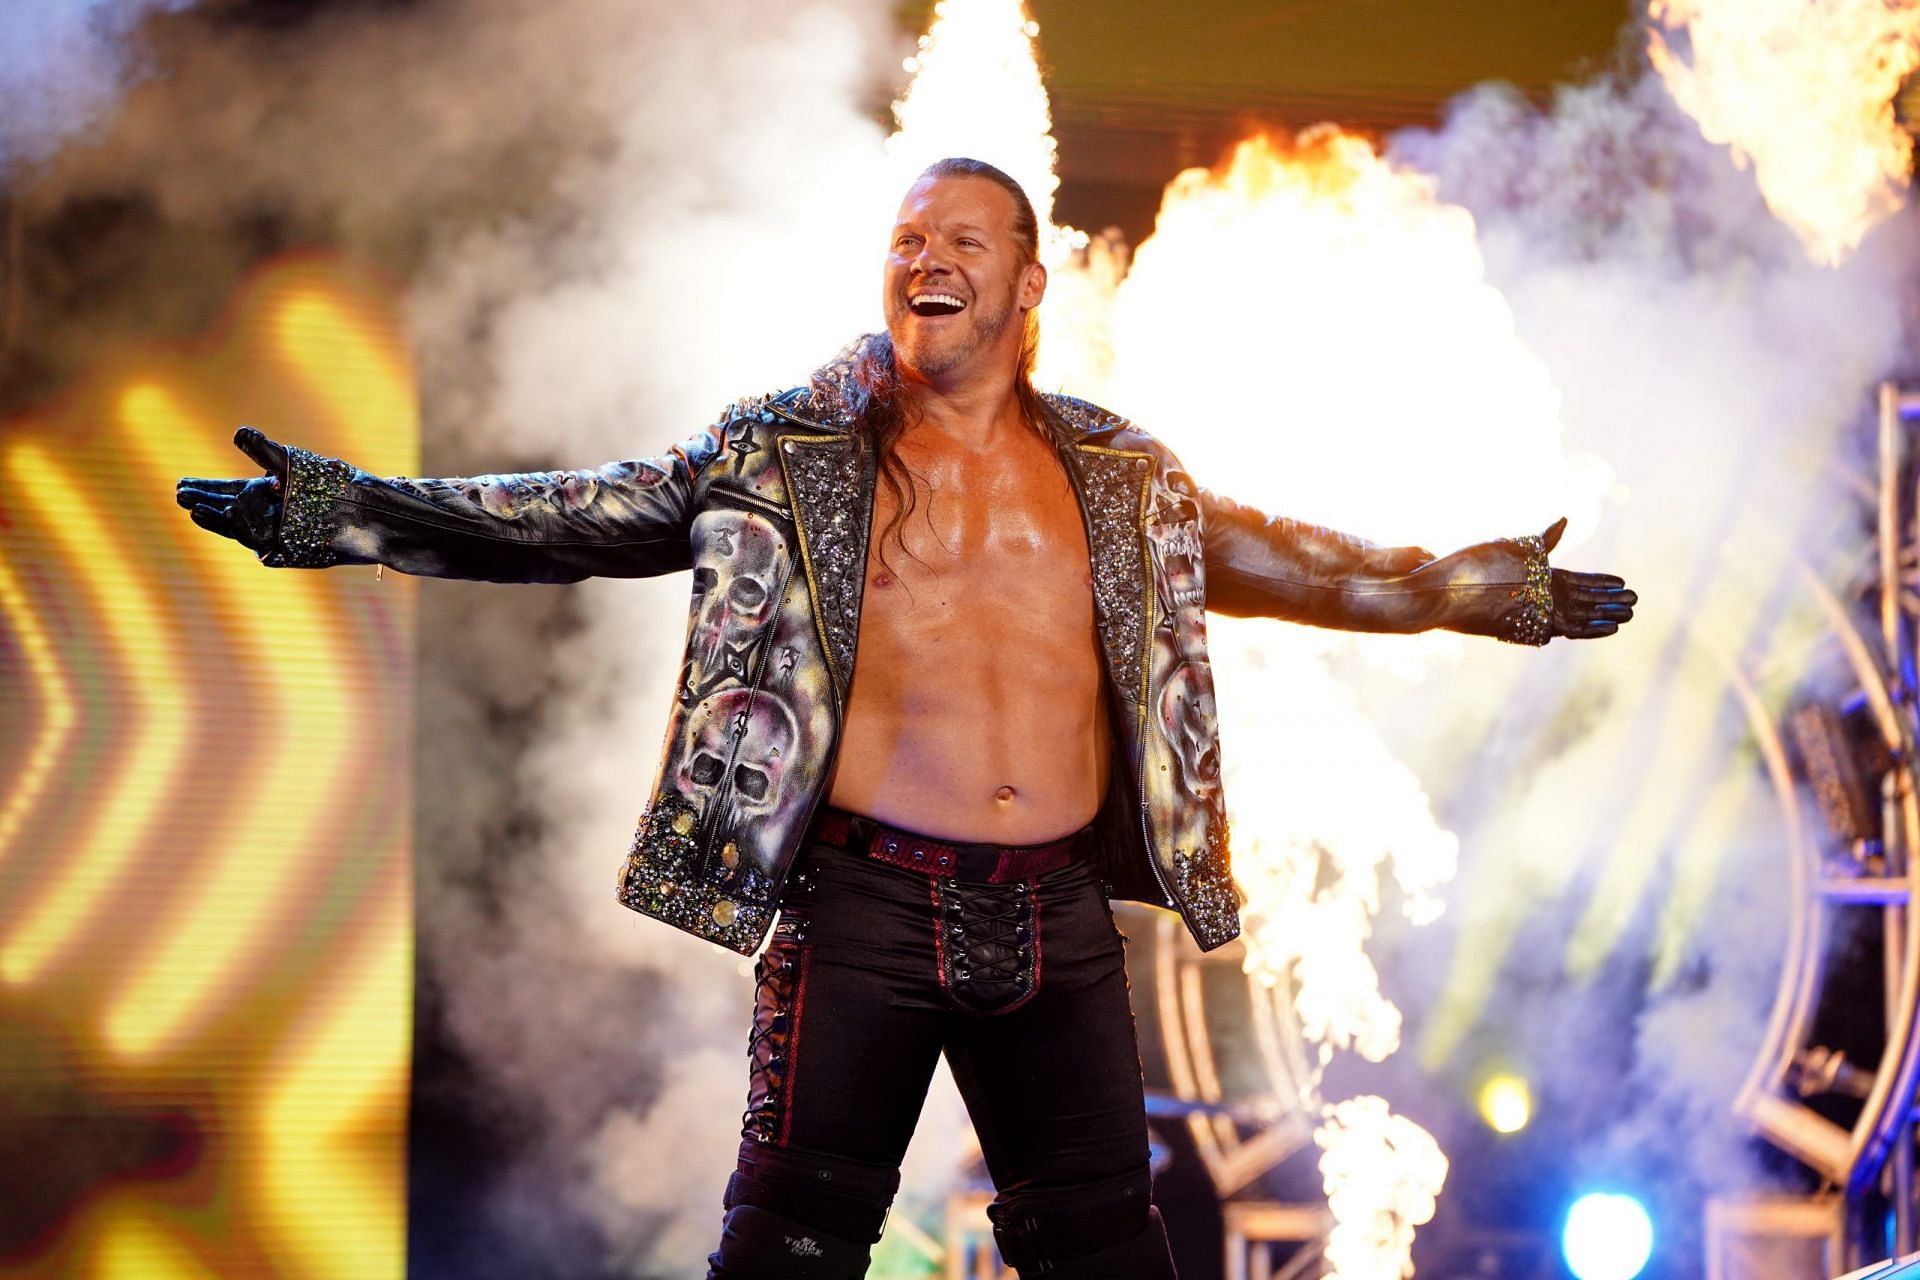 Chris Jericho was recently warned by Eddie Kingston after AEW Rampage